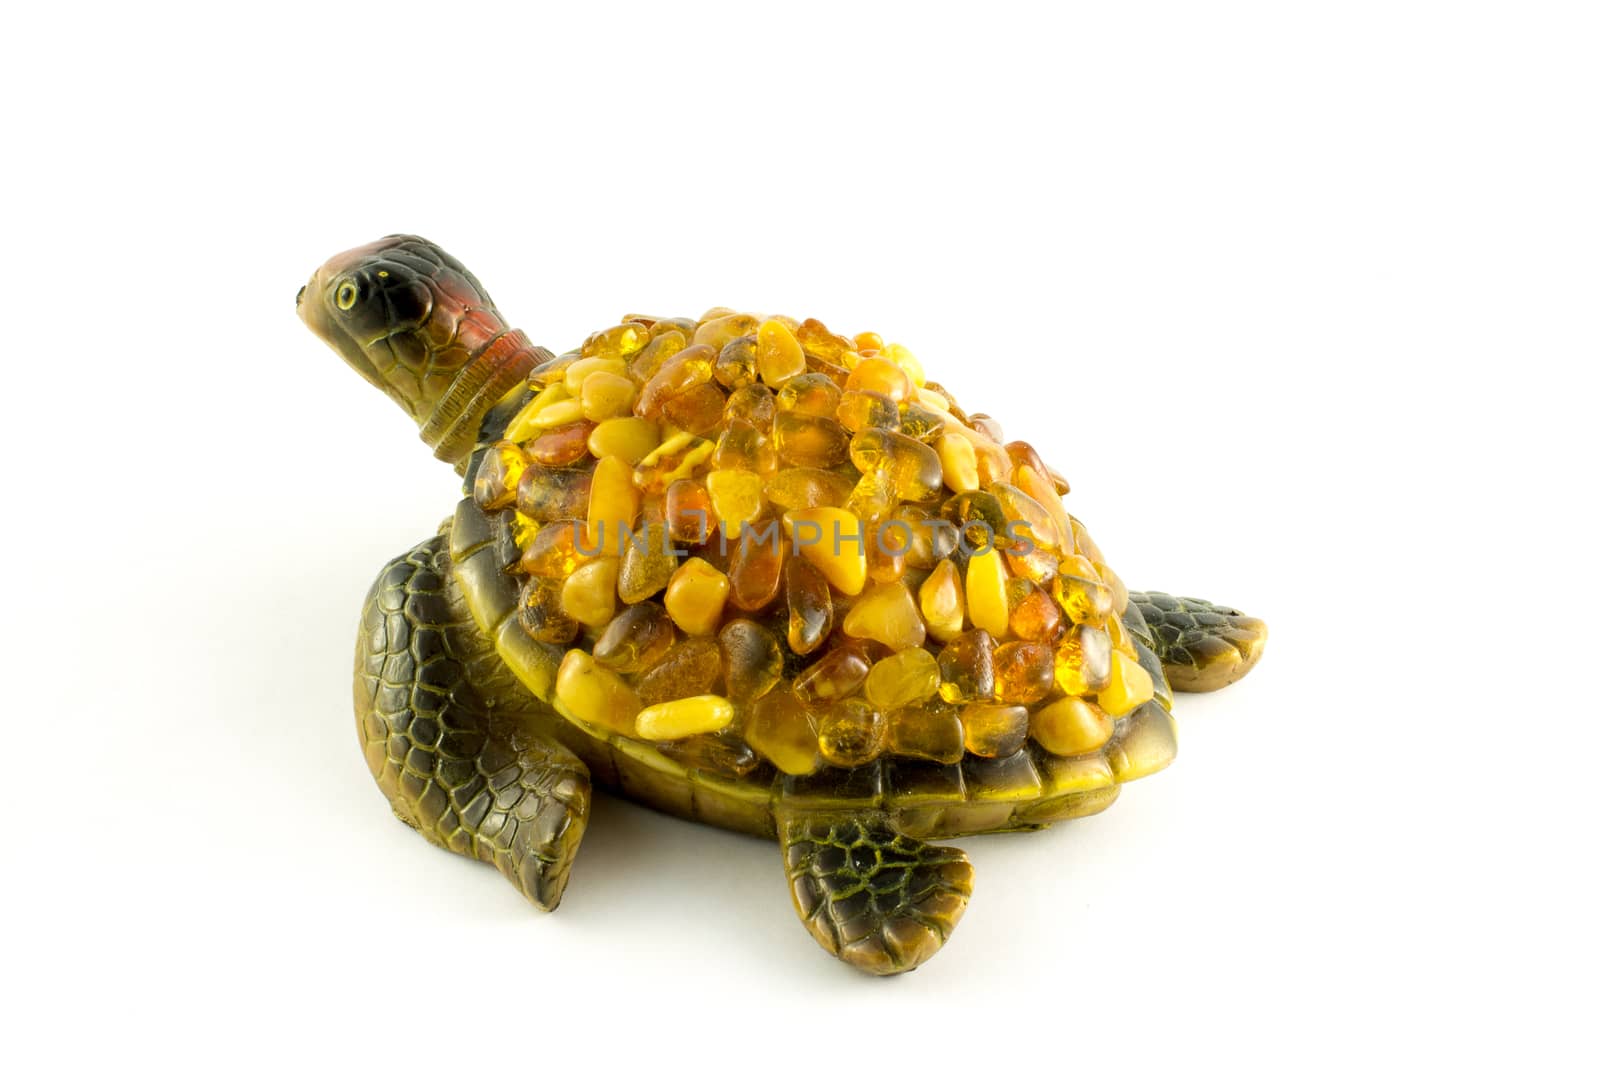 turtle on a white background with amber on the back